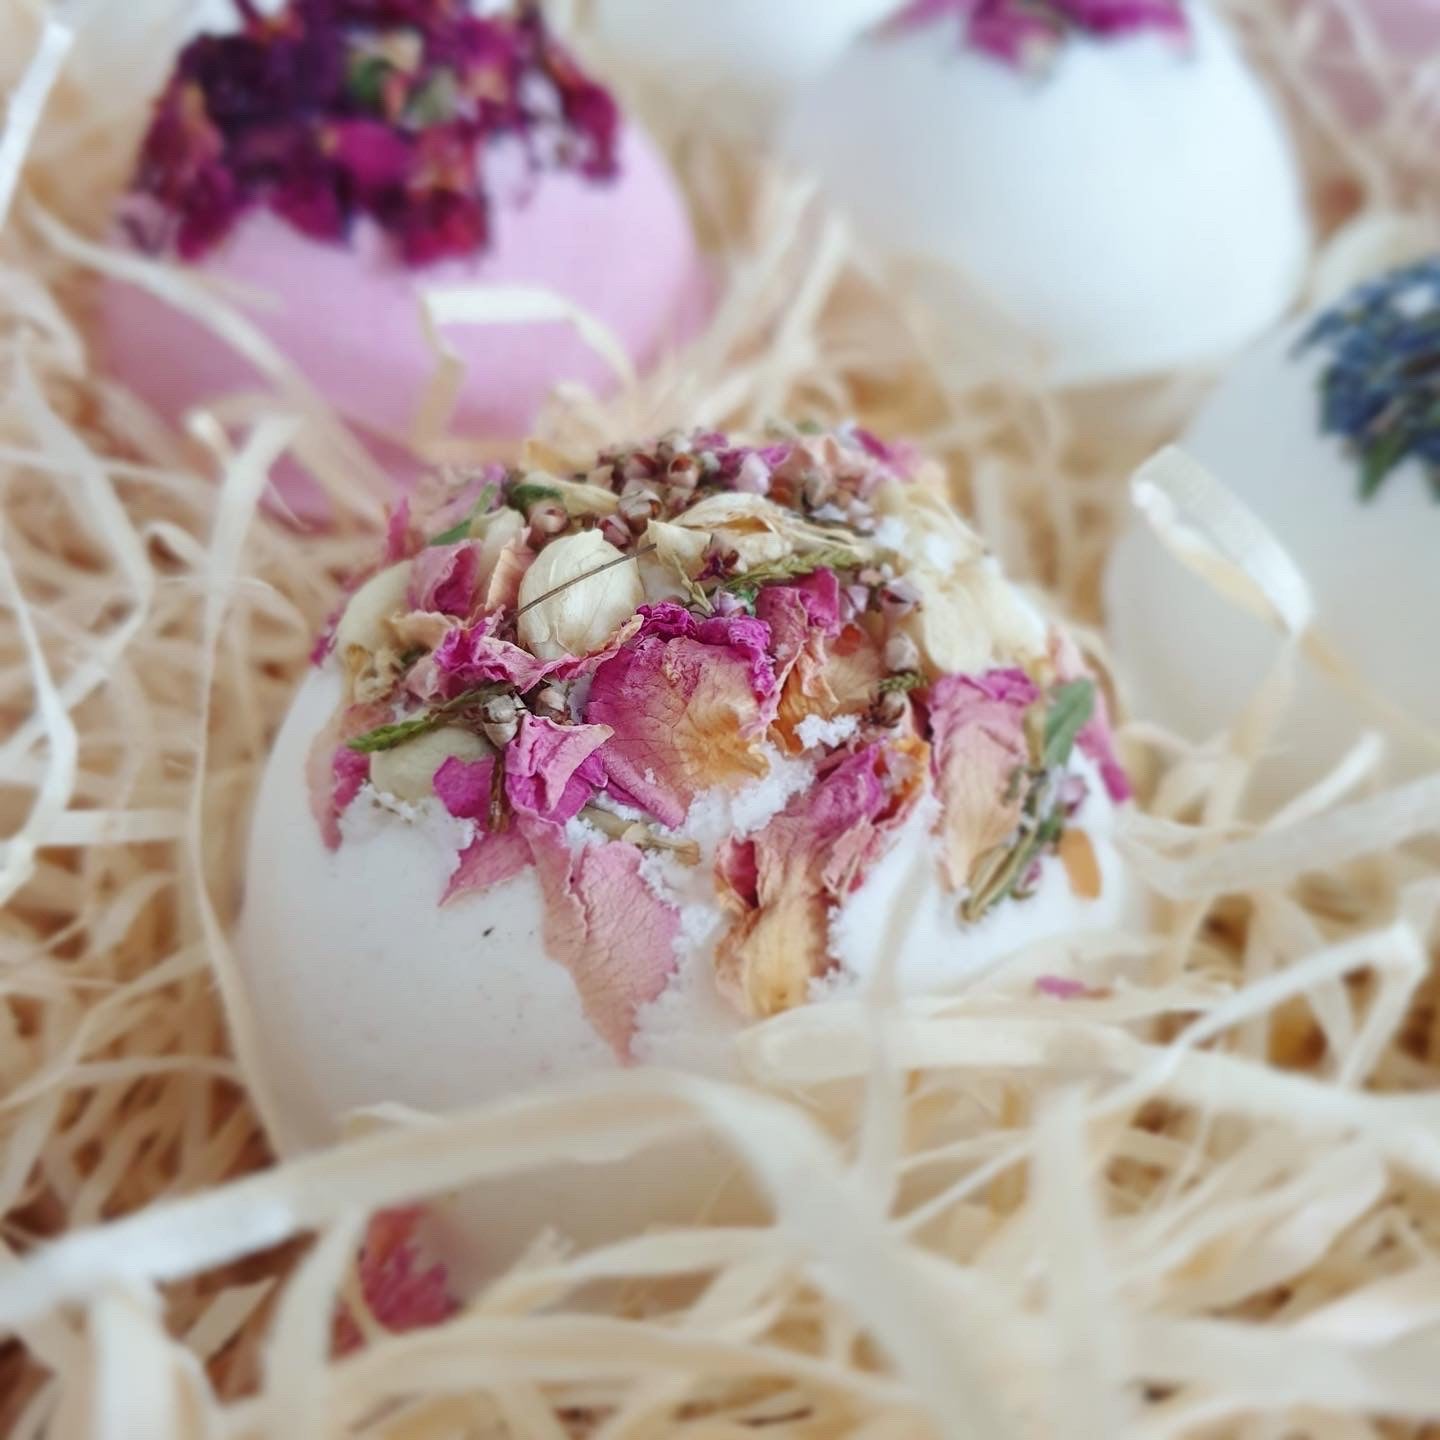 Posy Secret Bath Bomb, decorated with botanicals, enriched with organic butters. Available in a pack with other all natural bath bombs by The Eden Collections